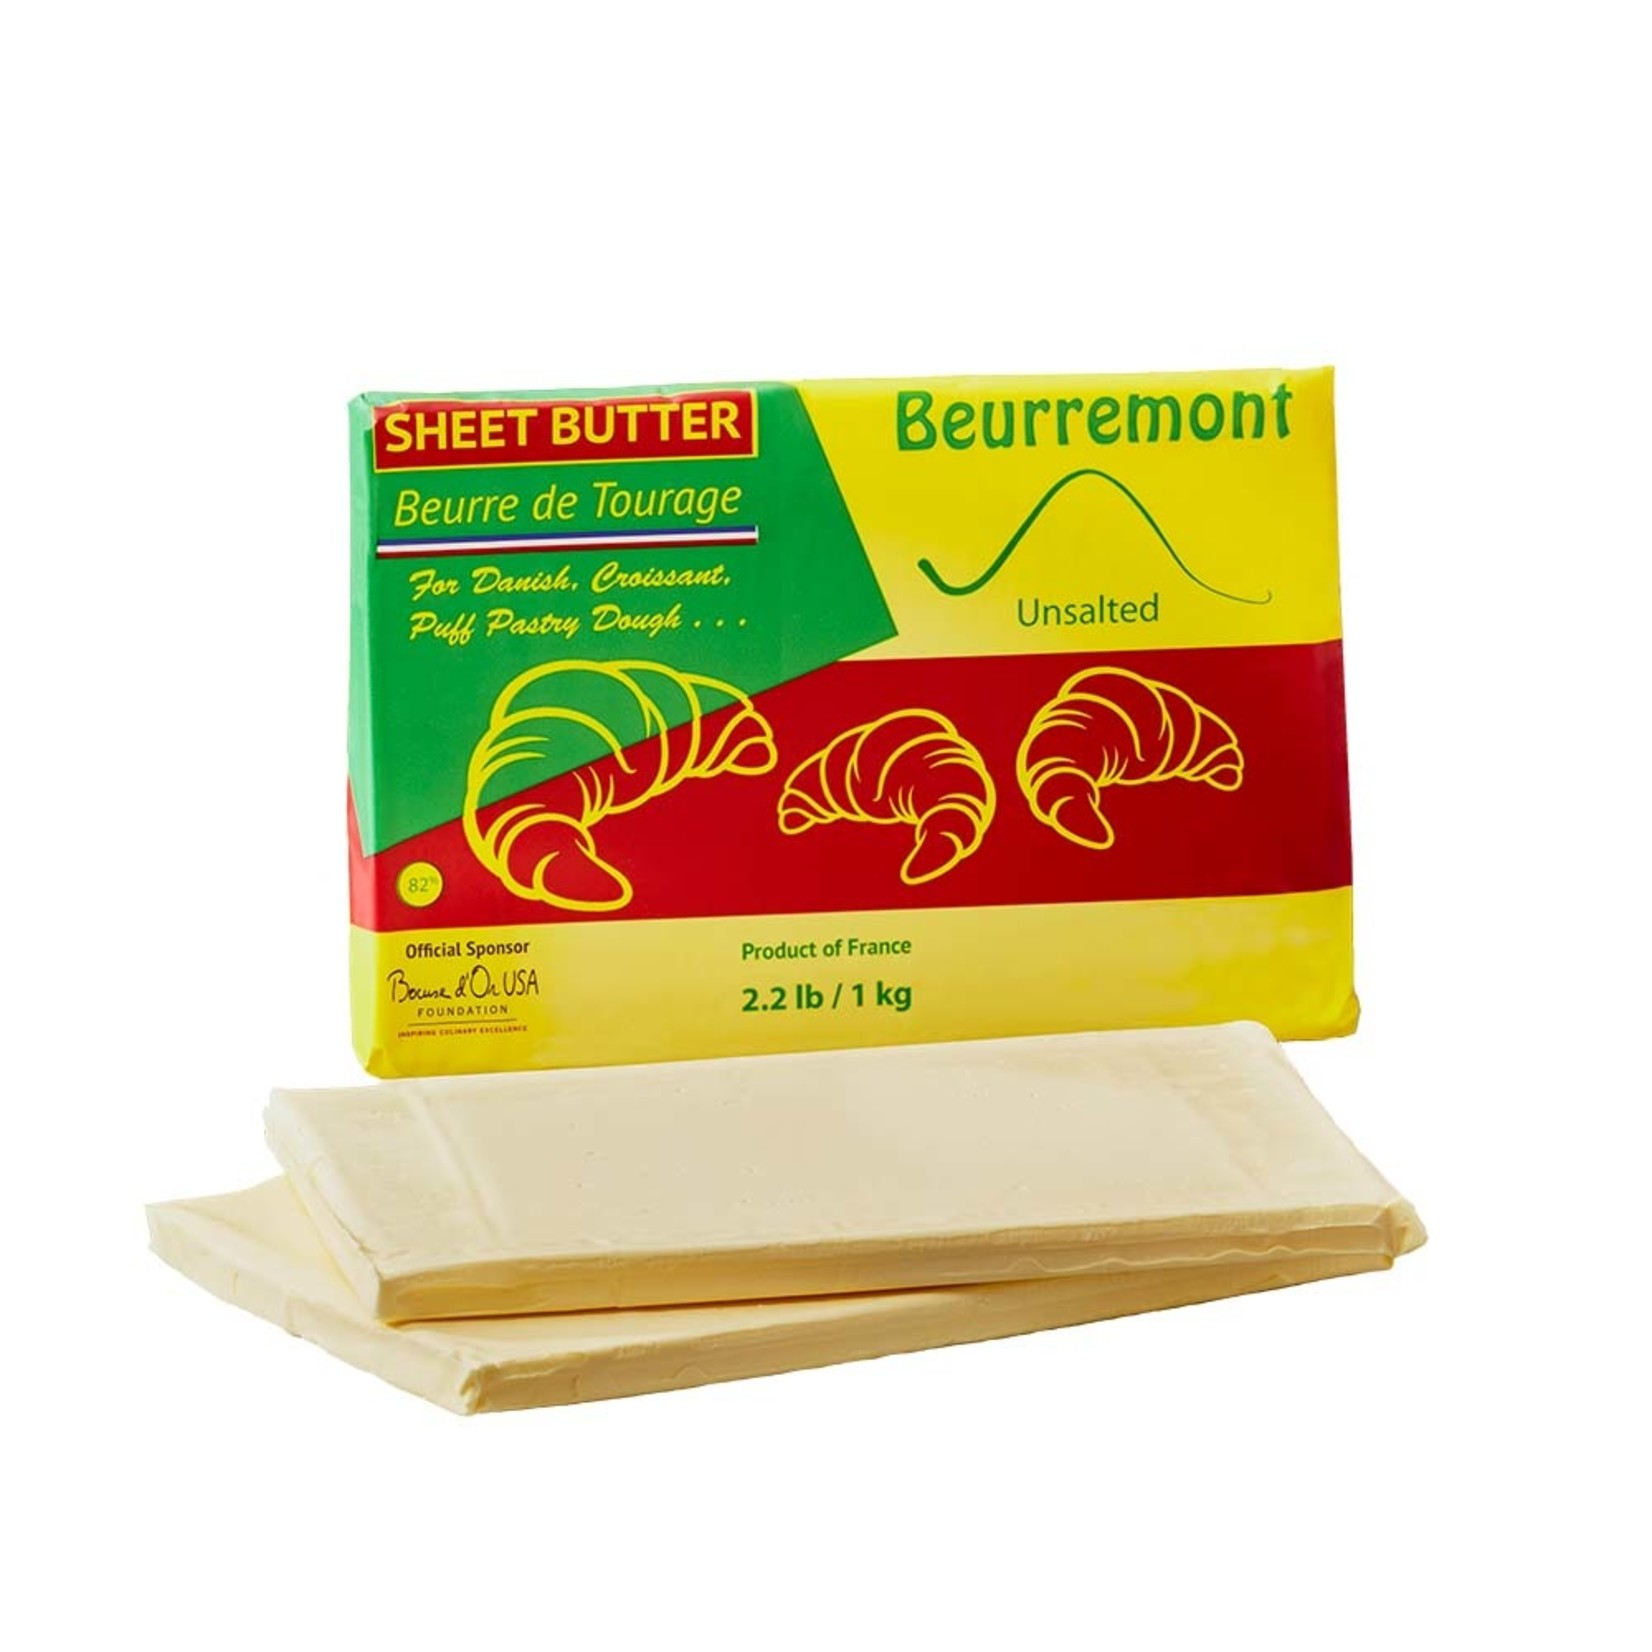 Beurremont - 82% Tourage Butter in Sheets - 2.2 lb